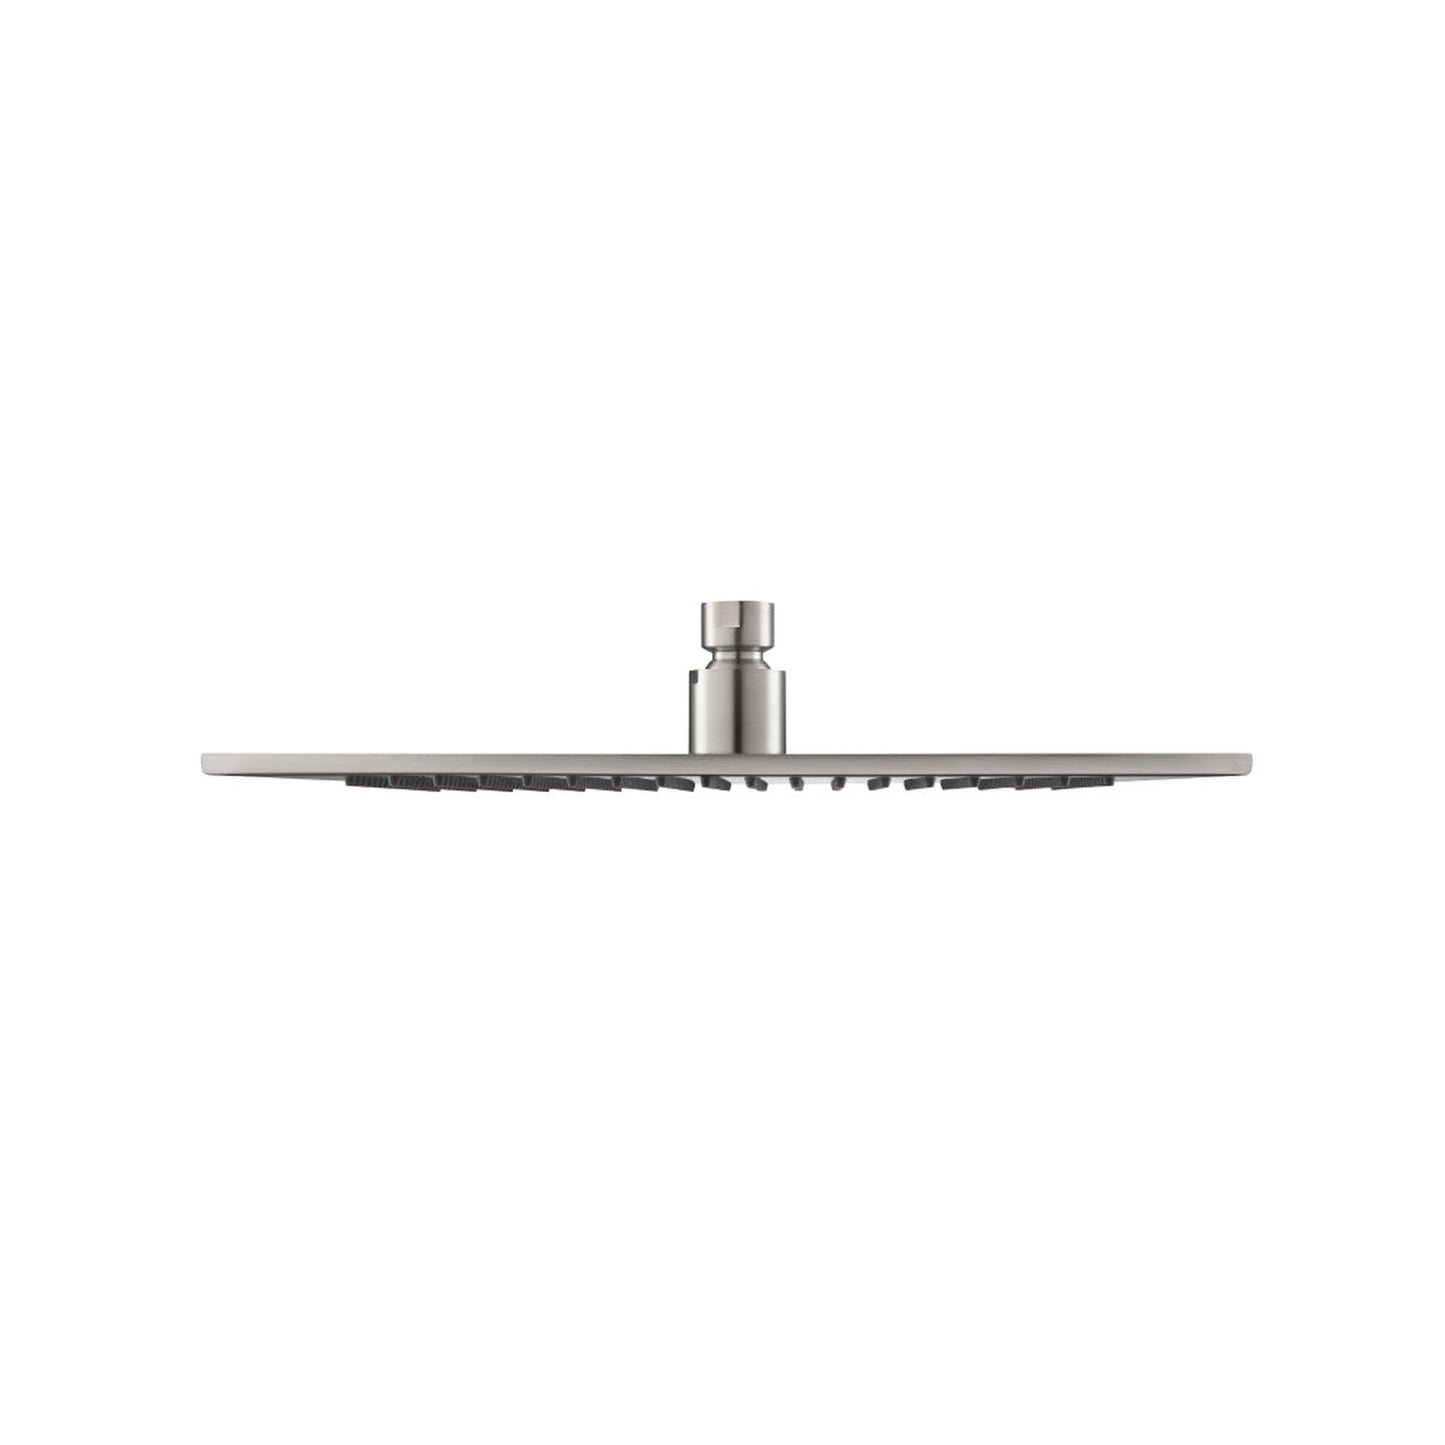 Isenberg Universal Fixtures 12" Single Function Square Brushed Nickel PVD Solid Brass Rain Shower Head